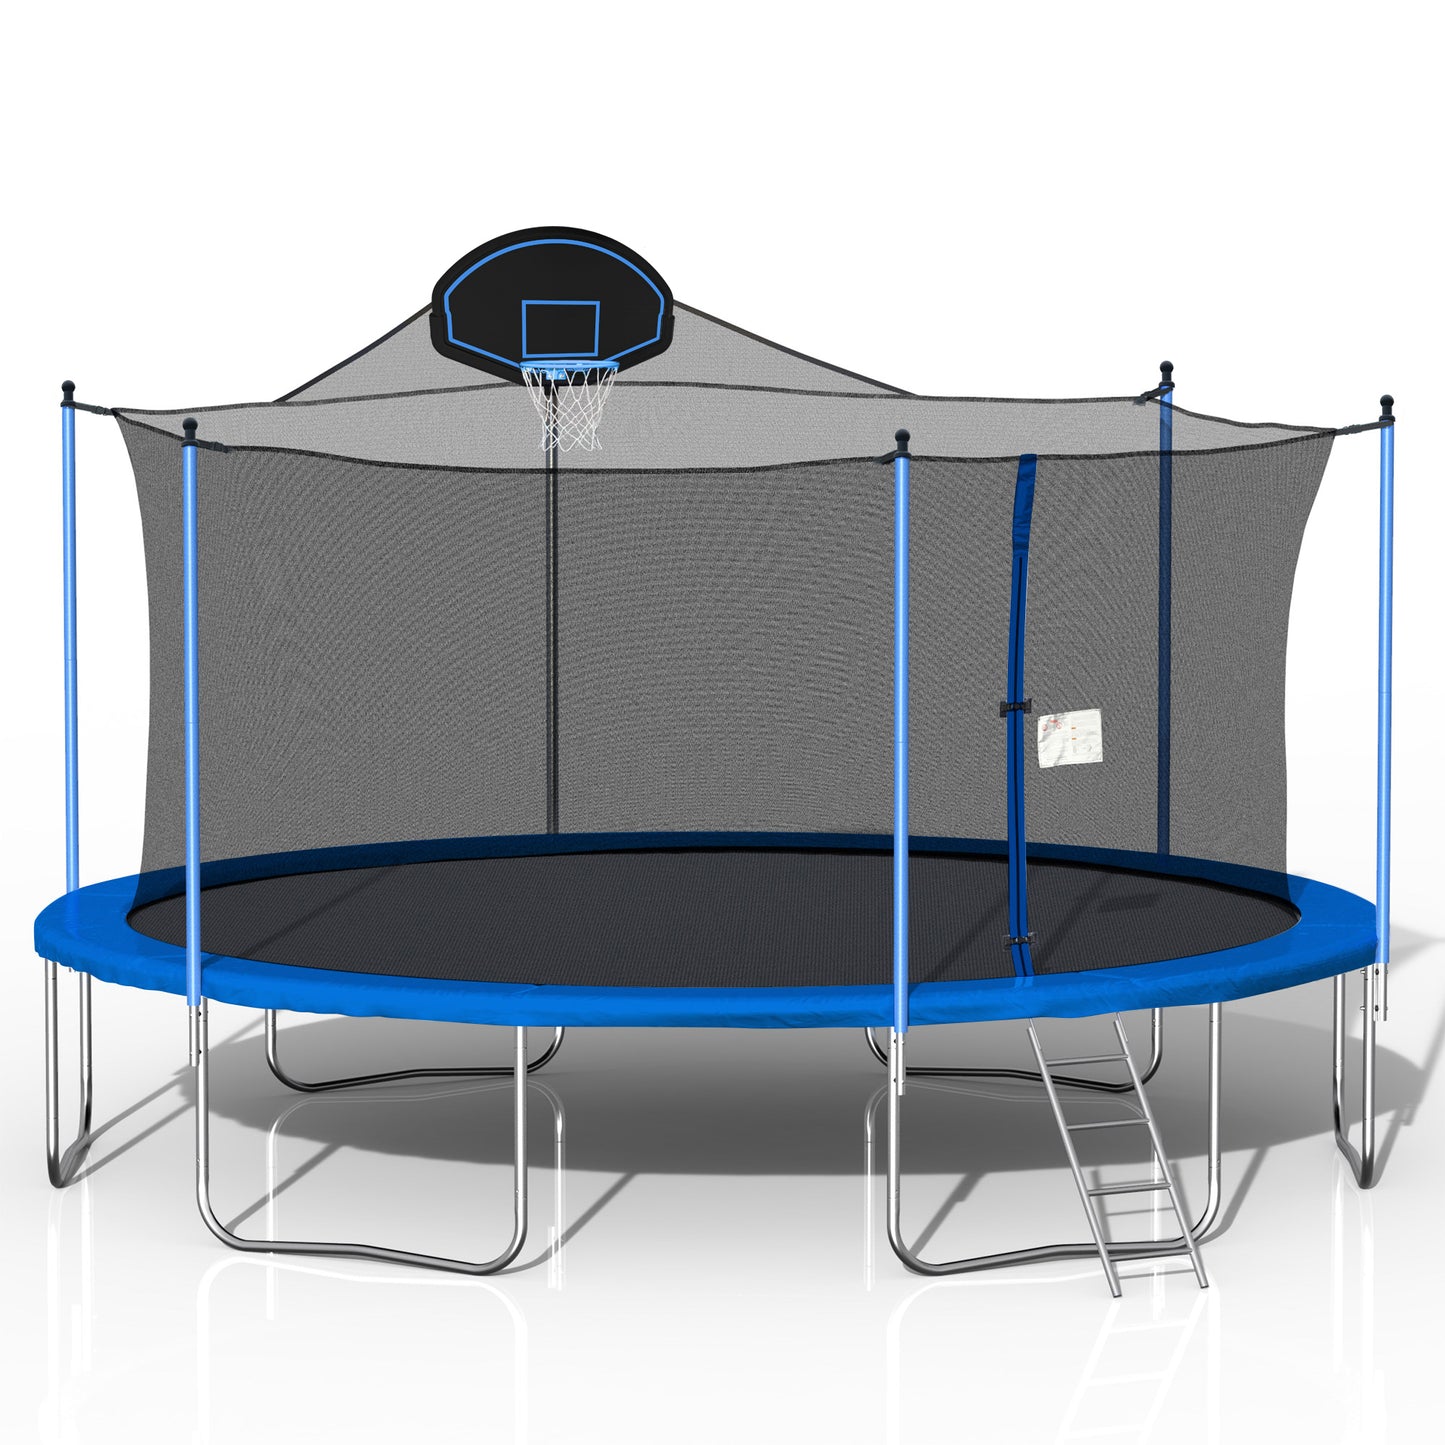 16FT Trampoline for Adults & Kids with Basketball Hoop, Double-sided cover,Outdoor Trampolines w/Ladder and Safety Enclosure Net for Kids and Adults